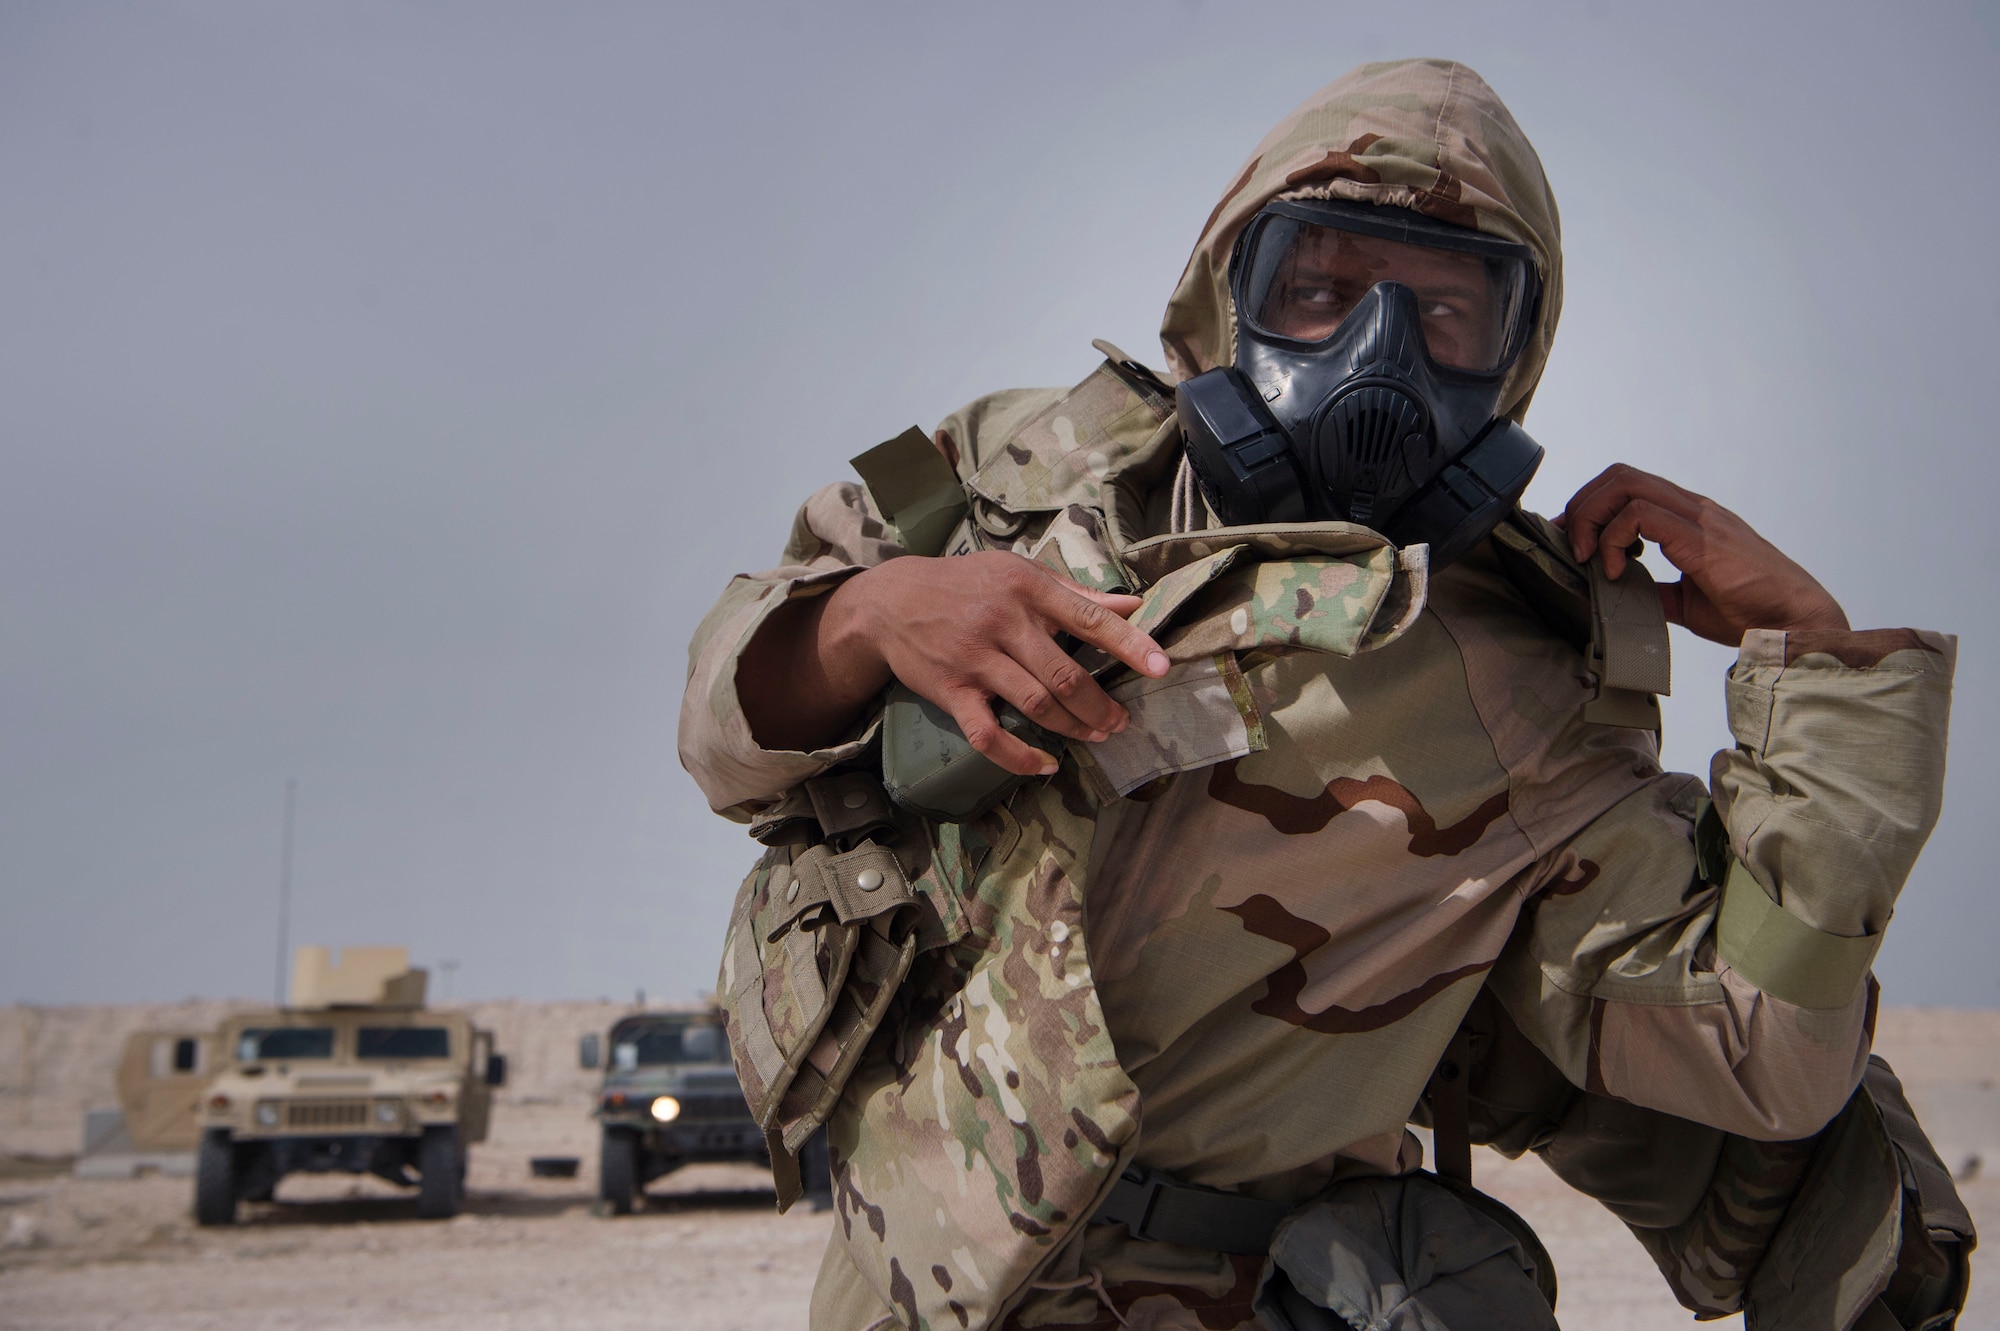 A U.S. Army Soldier of the 1st Battalion, 43rd Air Defense Artillery (ADA) regiment, 11th ADA Brigade, dons Mission Oriented Protective Posture (MOPP) gear during a joint decontamination exercise Feb. 22, 2019, at Al Udeid Air Base, Qatar. U.S. Air Force and Army participants from the 379th Expeditionary Civil Engineer Squadron and the 1-43rd ADA, shared Chemical, Biological, Radiological, Nuclear, and high yield explosives (CBRNE) best practices, and tested their response proficiency during the training. The event was the conclusion of a four phase training curriculum. (U.S. Air Force photo by Tech. Sgt. Christopher Hubenthal)